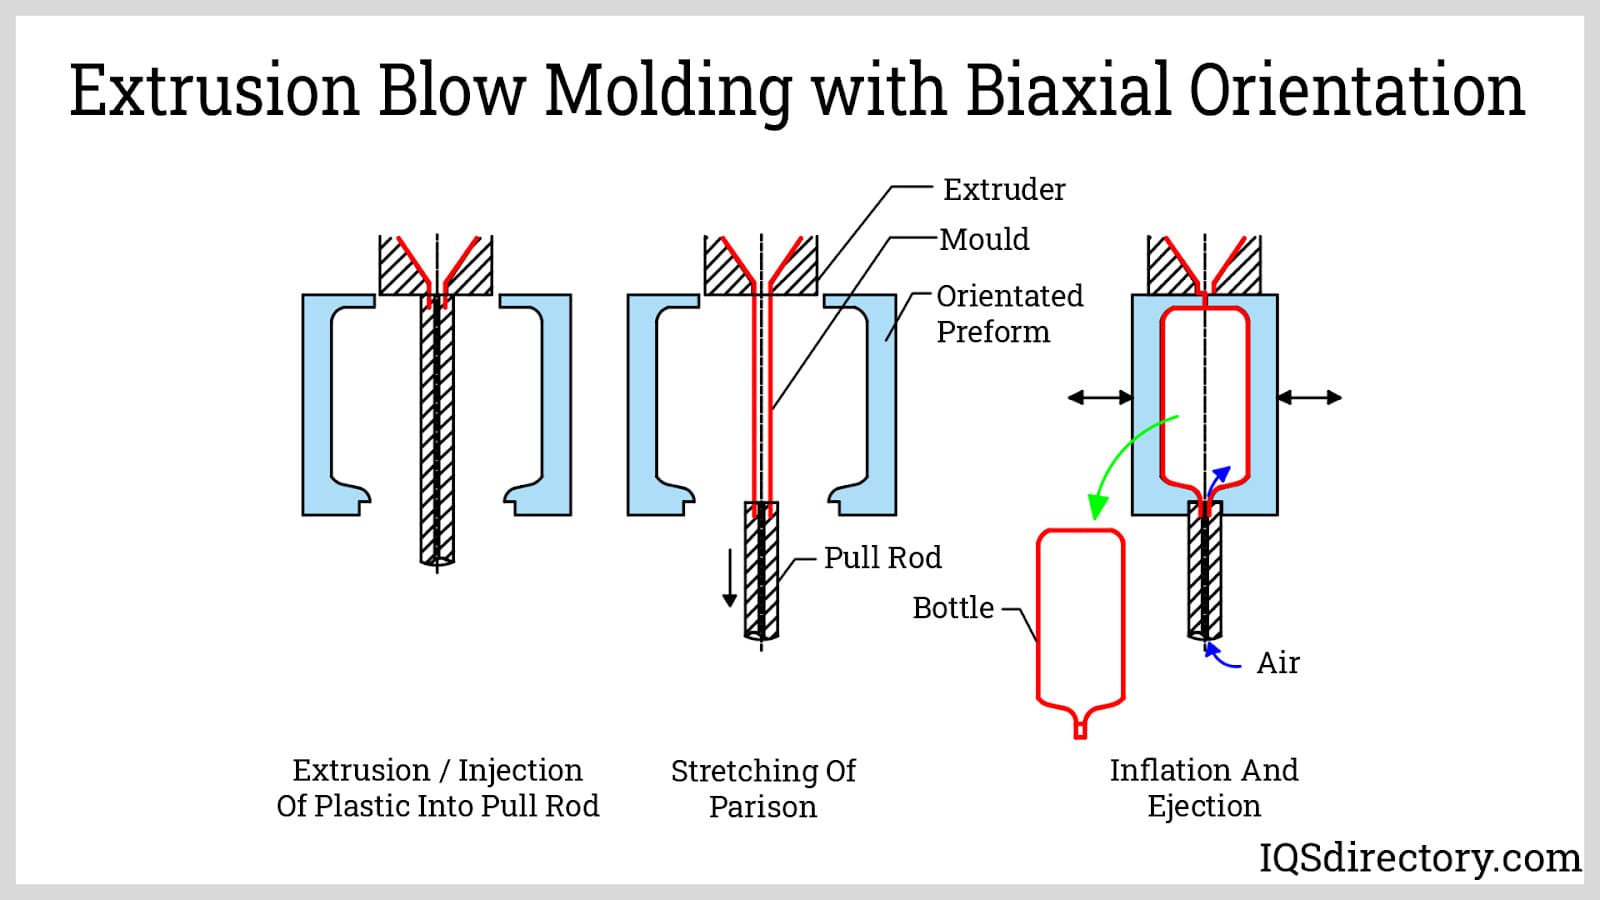 Extrusion Blow Molding with Biaxial Orientation